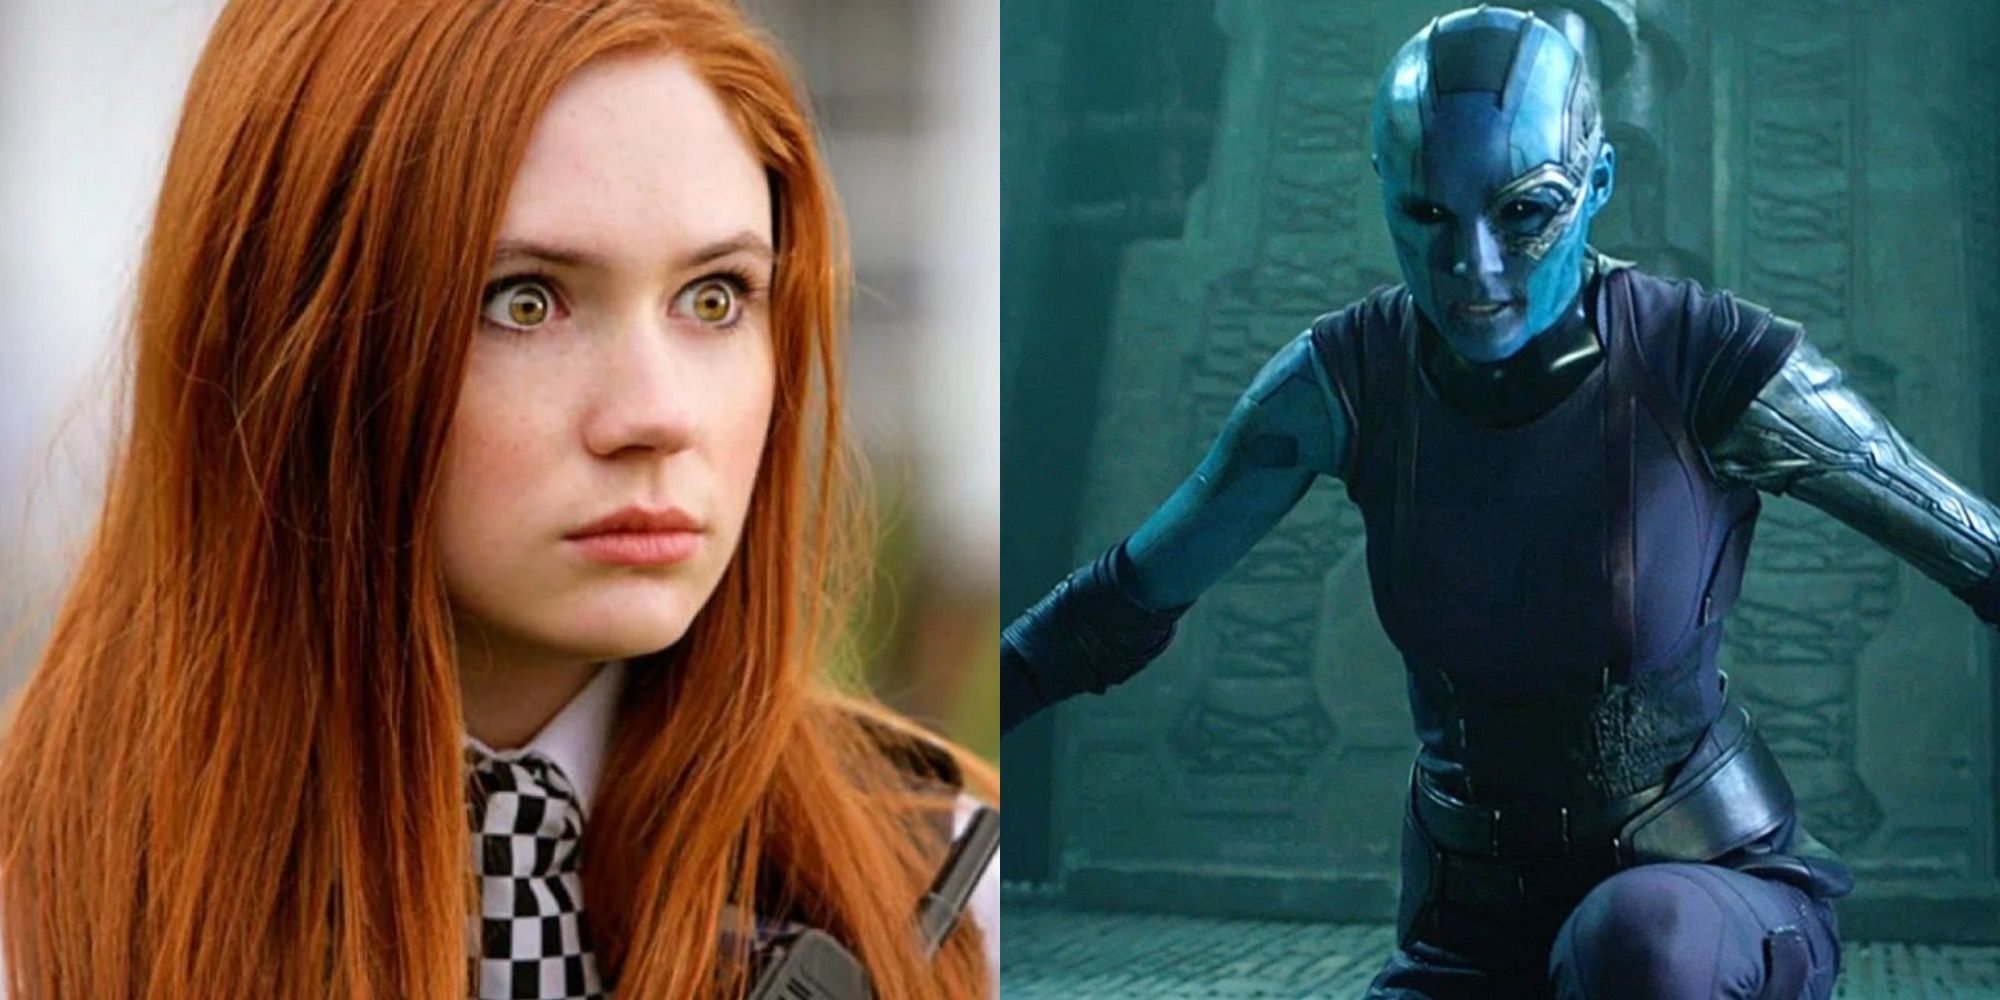 Karen Gillan as Amy Pond in Doctor Who and Nebula in Guardians of the Galaxy